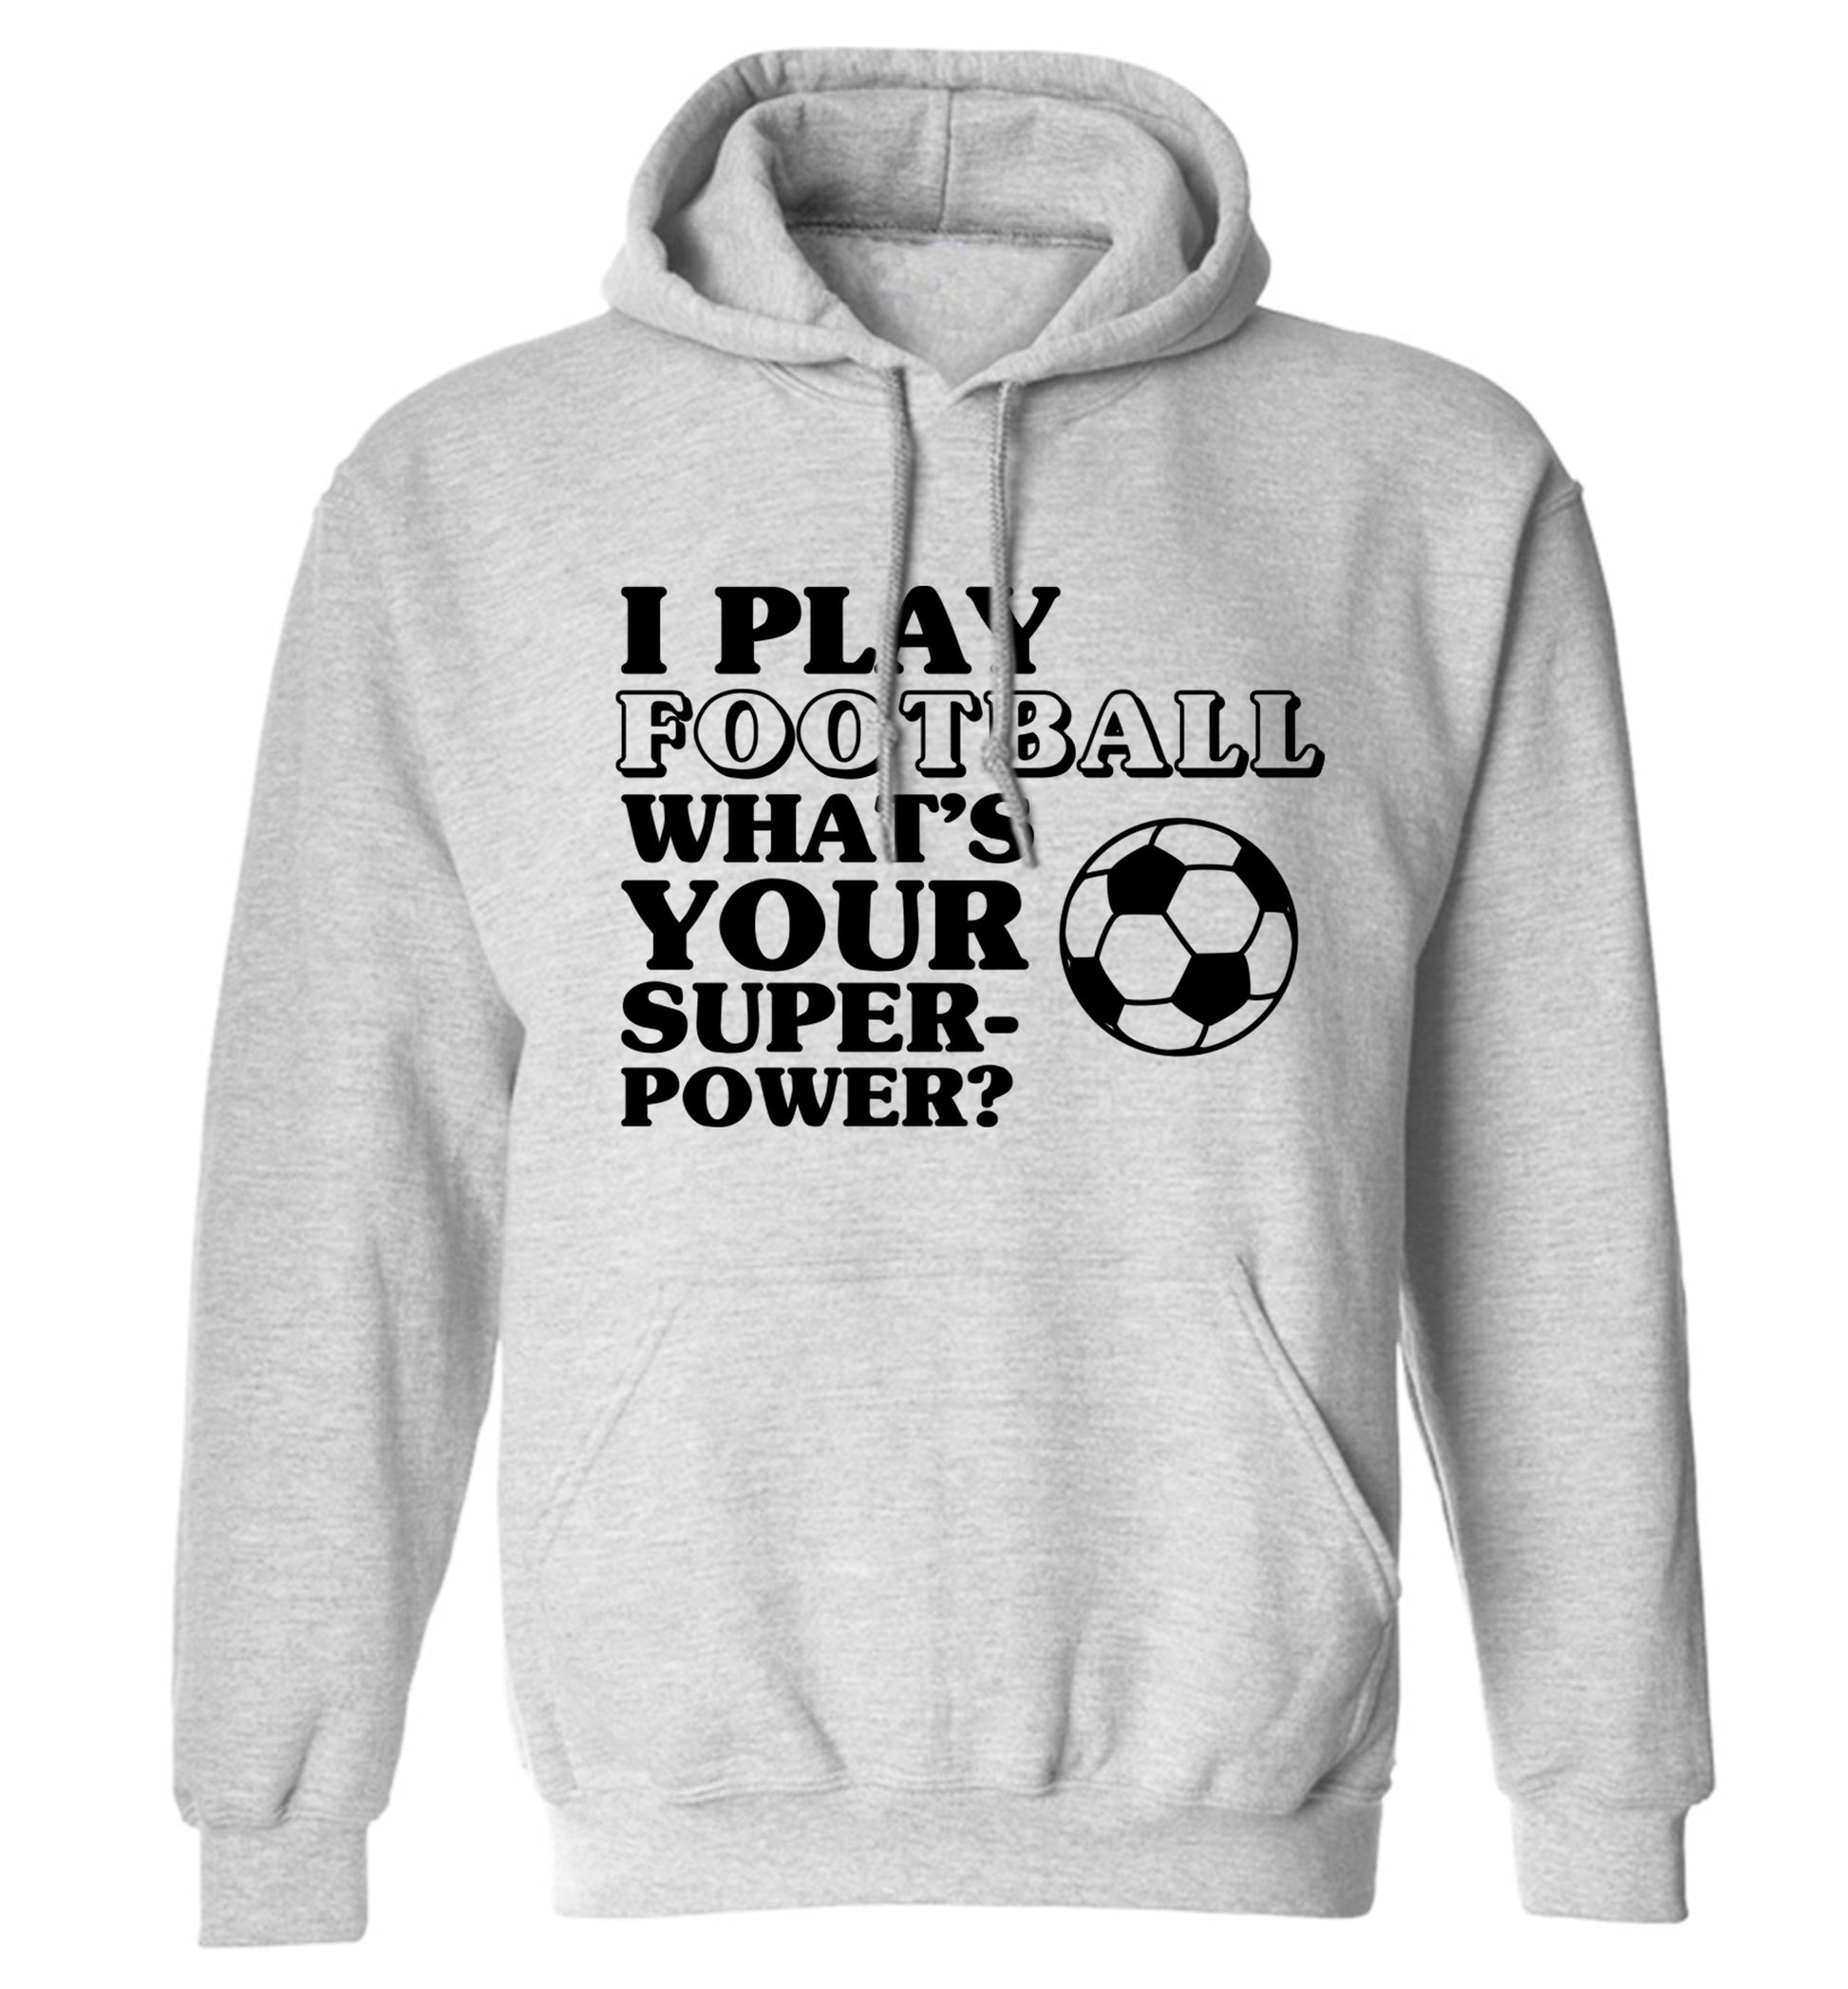 I play football what's your superpower? adults unisexgrey hoodie 2XL